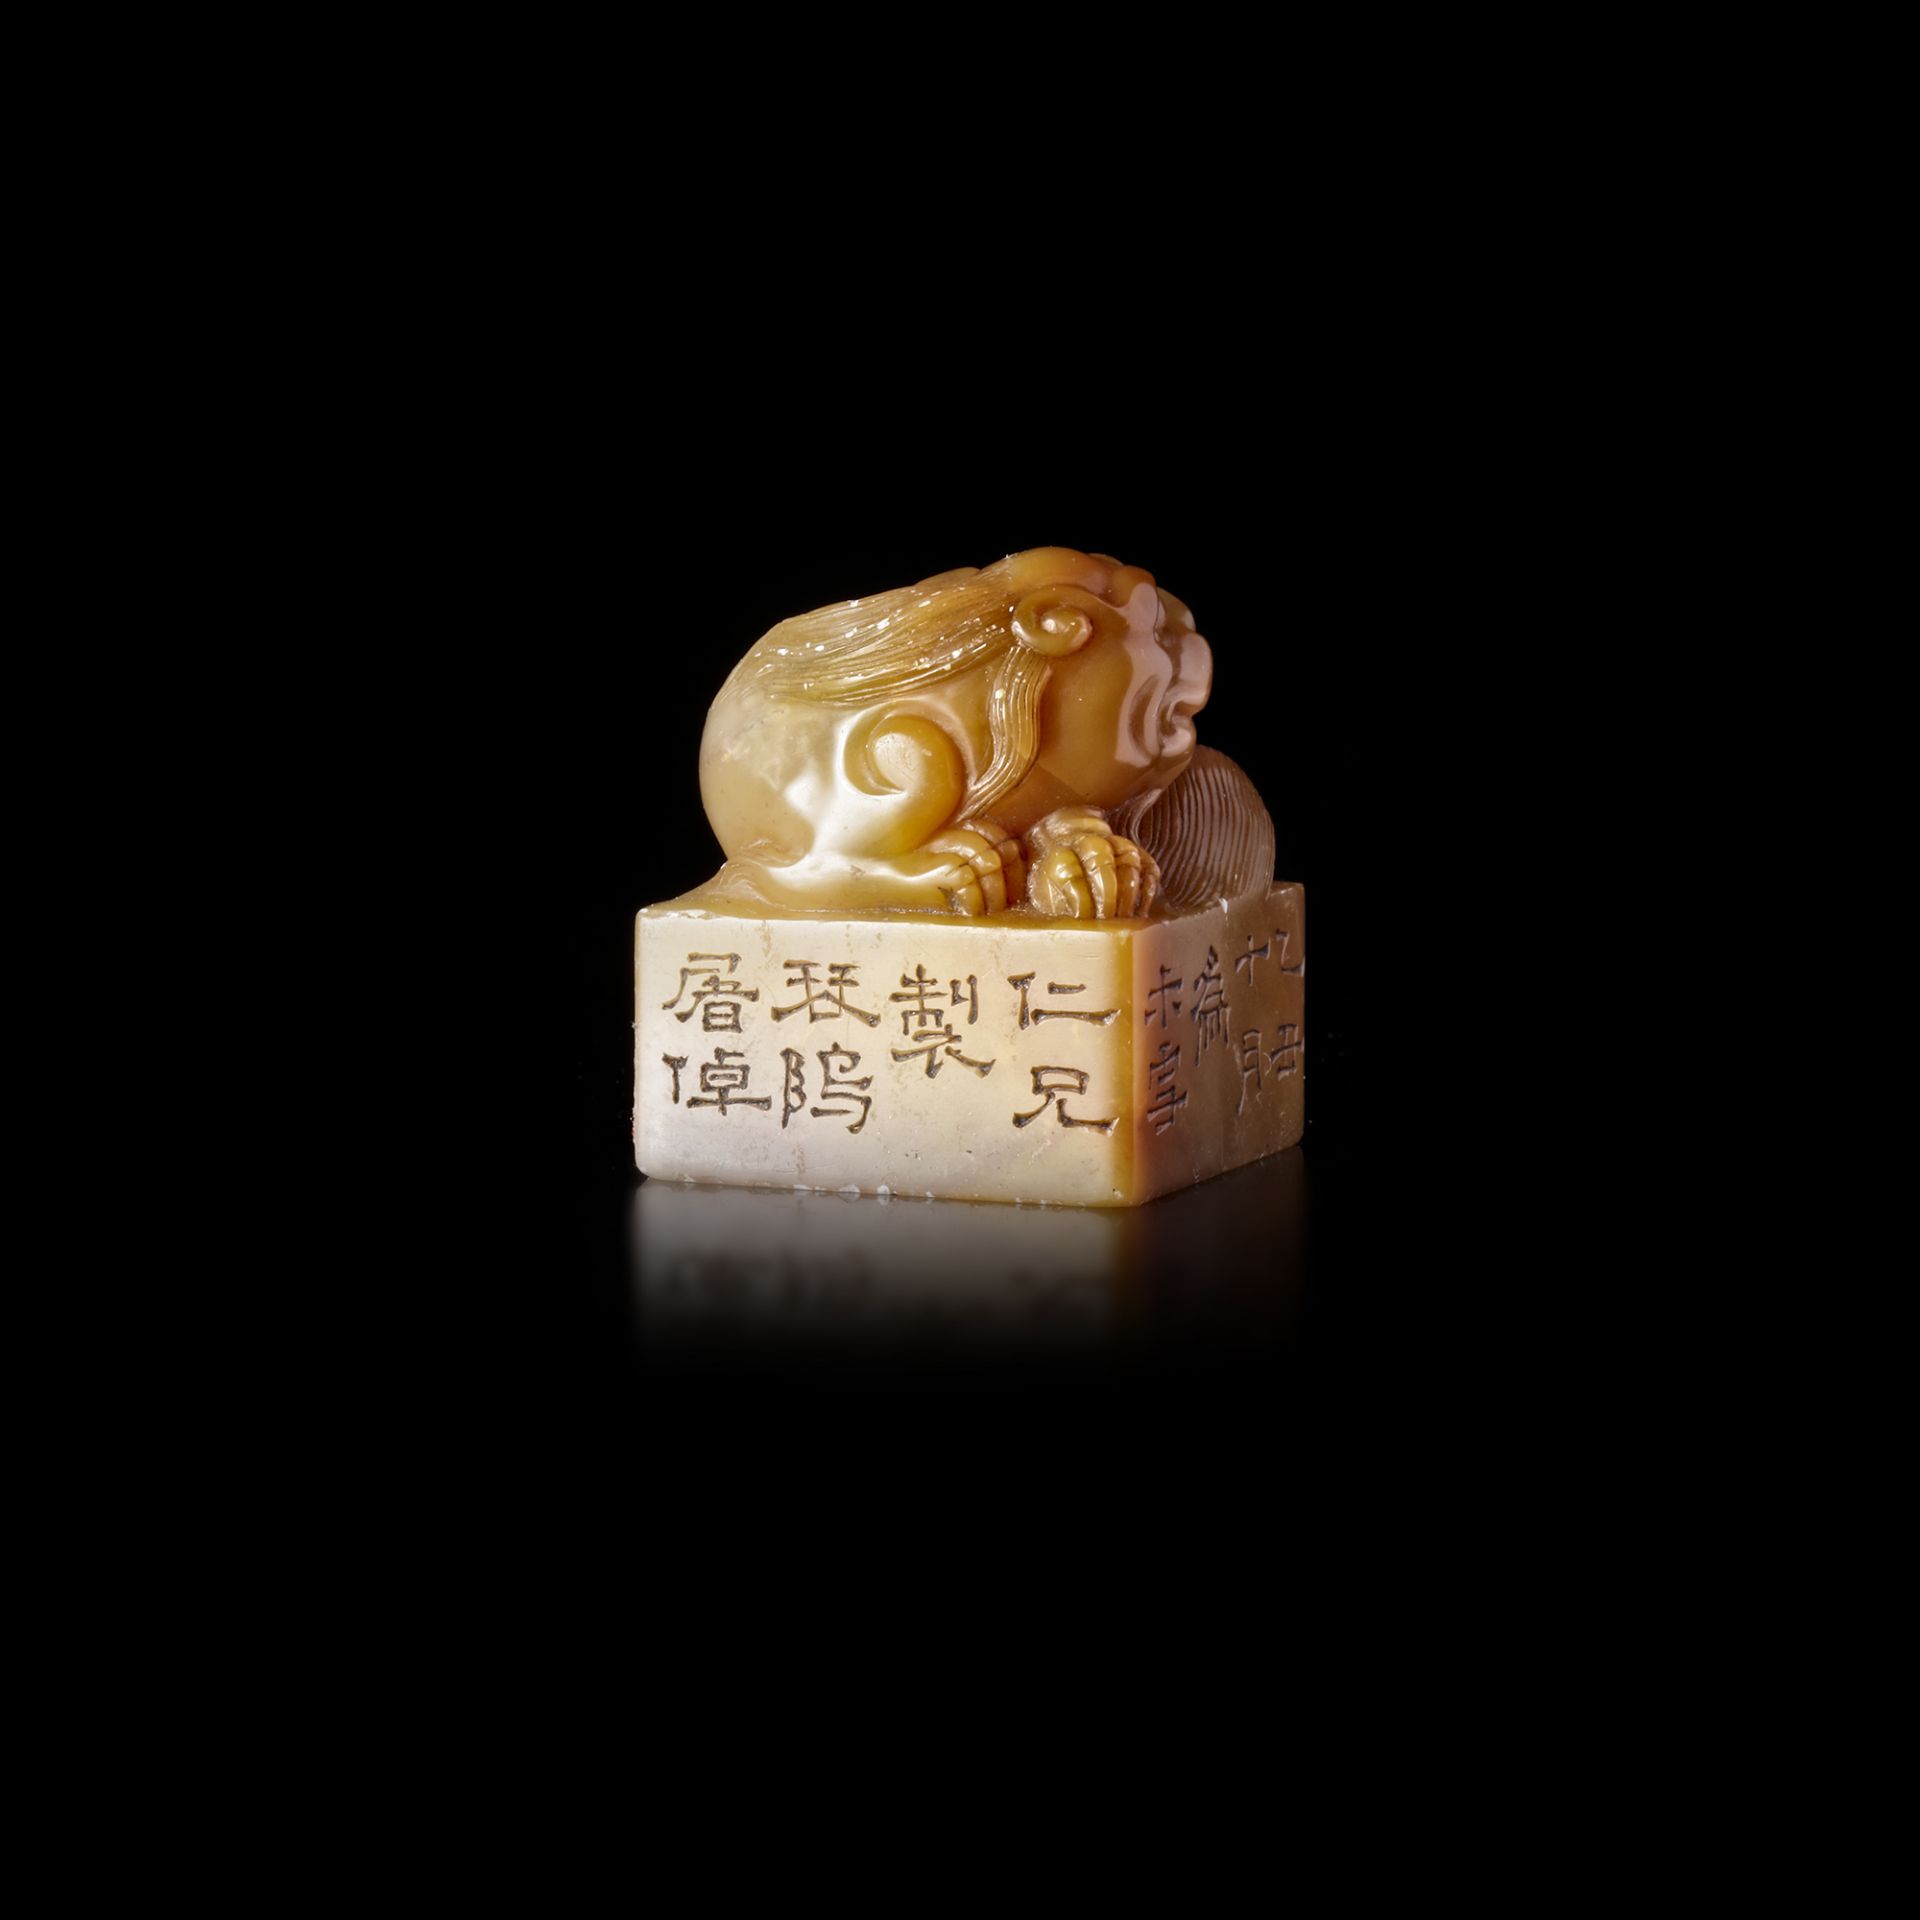 A CHINESE CARVED 'LION' TIANHUANG SEAL, QING DYNASTY (1644-1911) - Image 2 of 3